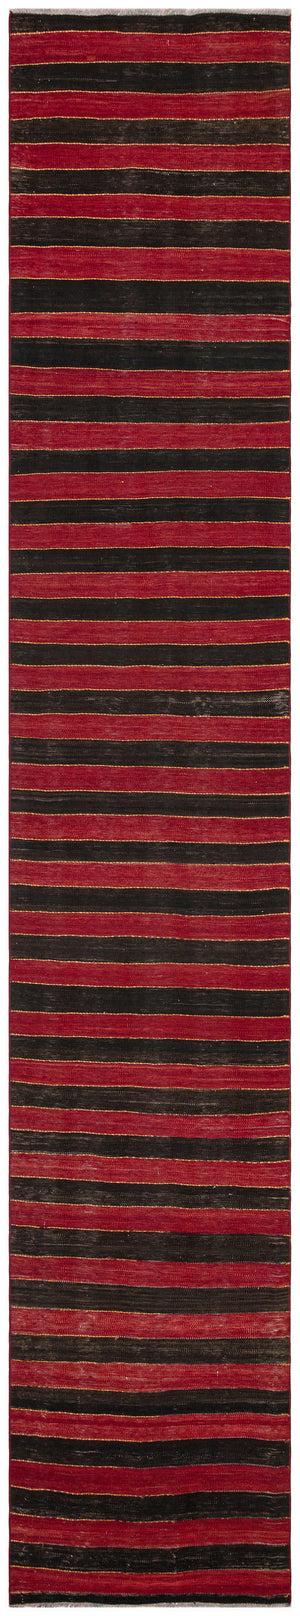 Striped Over Dyed Kilim Rug 2'9'' x 14'8'' ft 84 x 448 cm